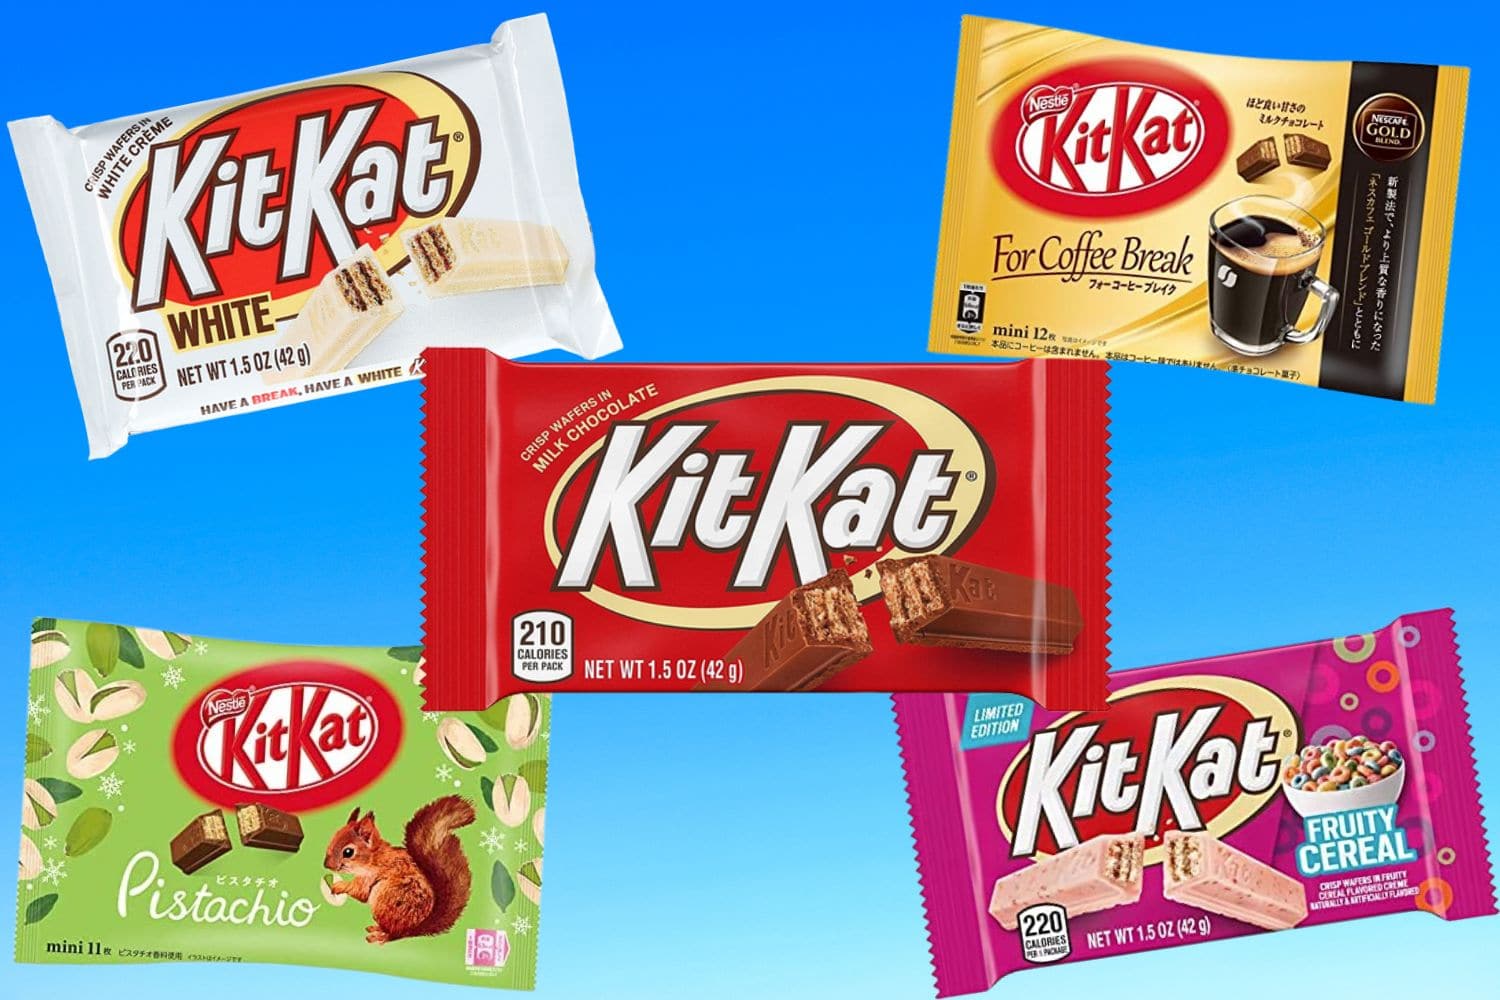 UPDATED] Two New Kit Kat Flavors Have Been Spotted In, 53 OFF